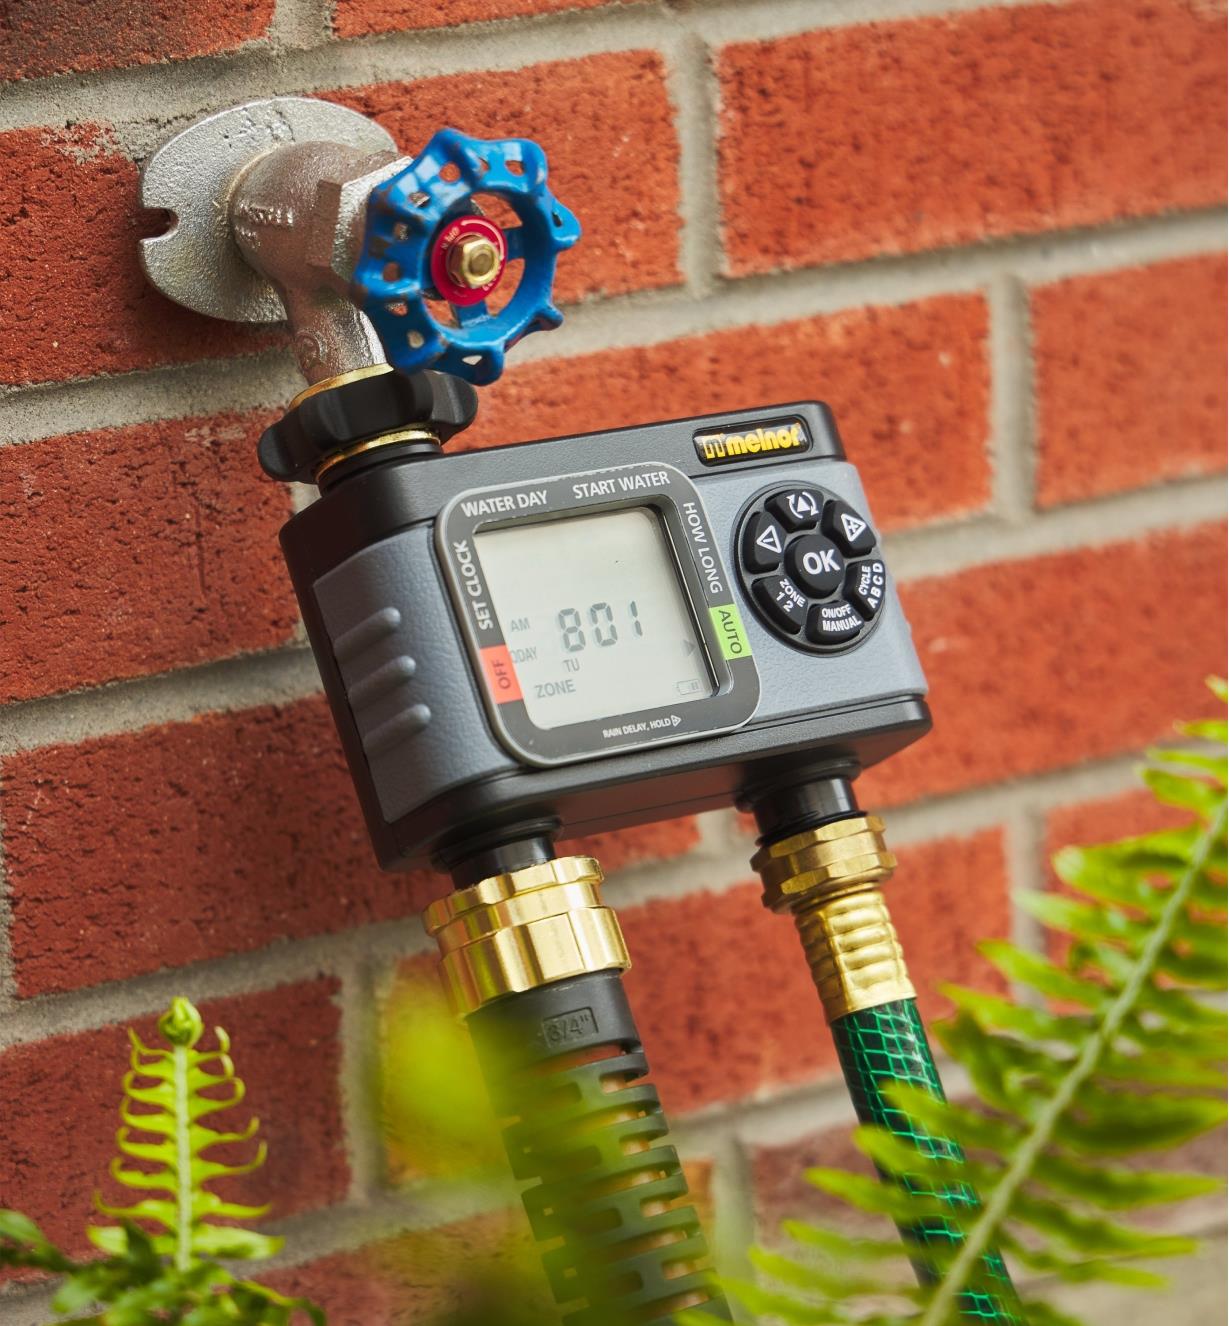 A two-zone electronic water timer connected to two hoses and an outdoor water faucet